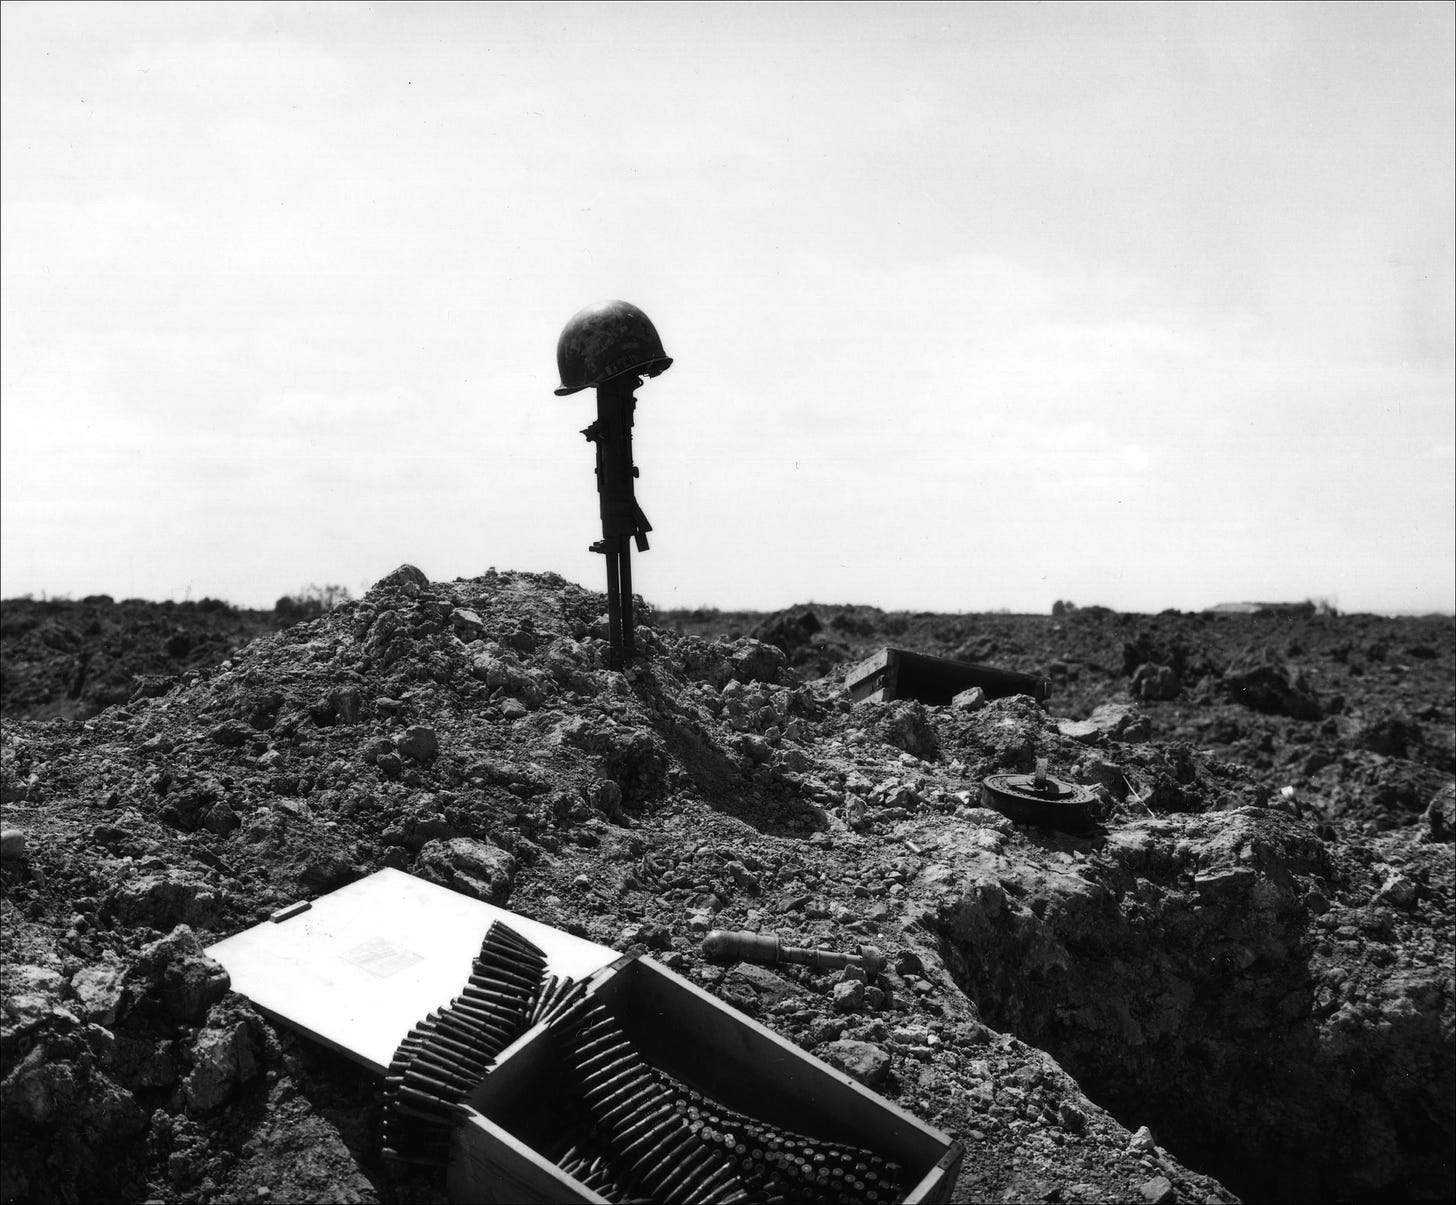 Black and white photo of a machine gun stuck into the ground, a GI helmet placed atop it, against a stark white cloudy sky. In the foreground are an open box of machine gun ammunition belts, an unexploded German grenade, and other debris of battle on the churned-up earth.